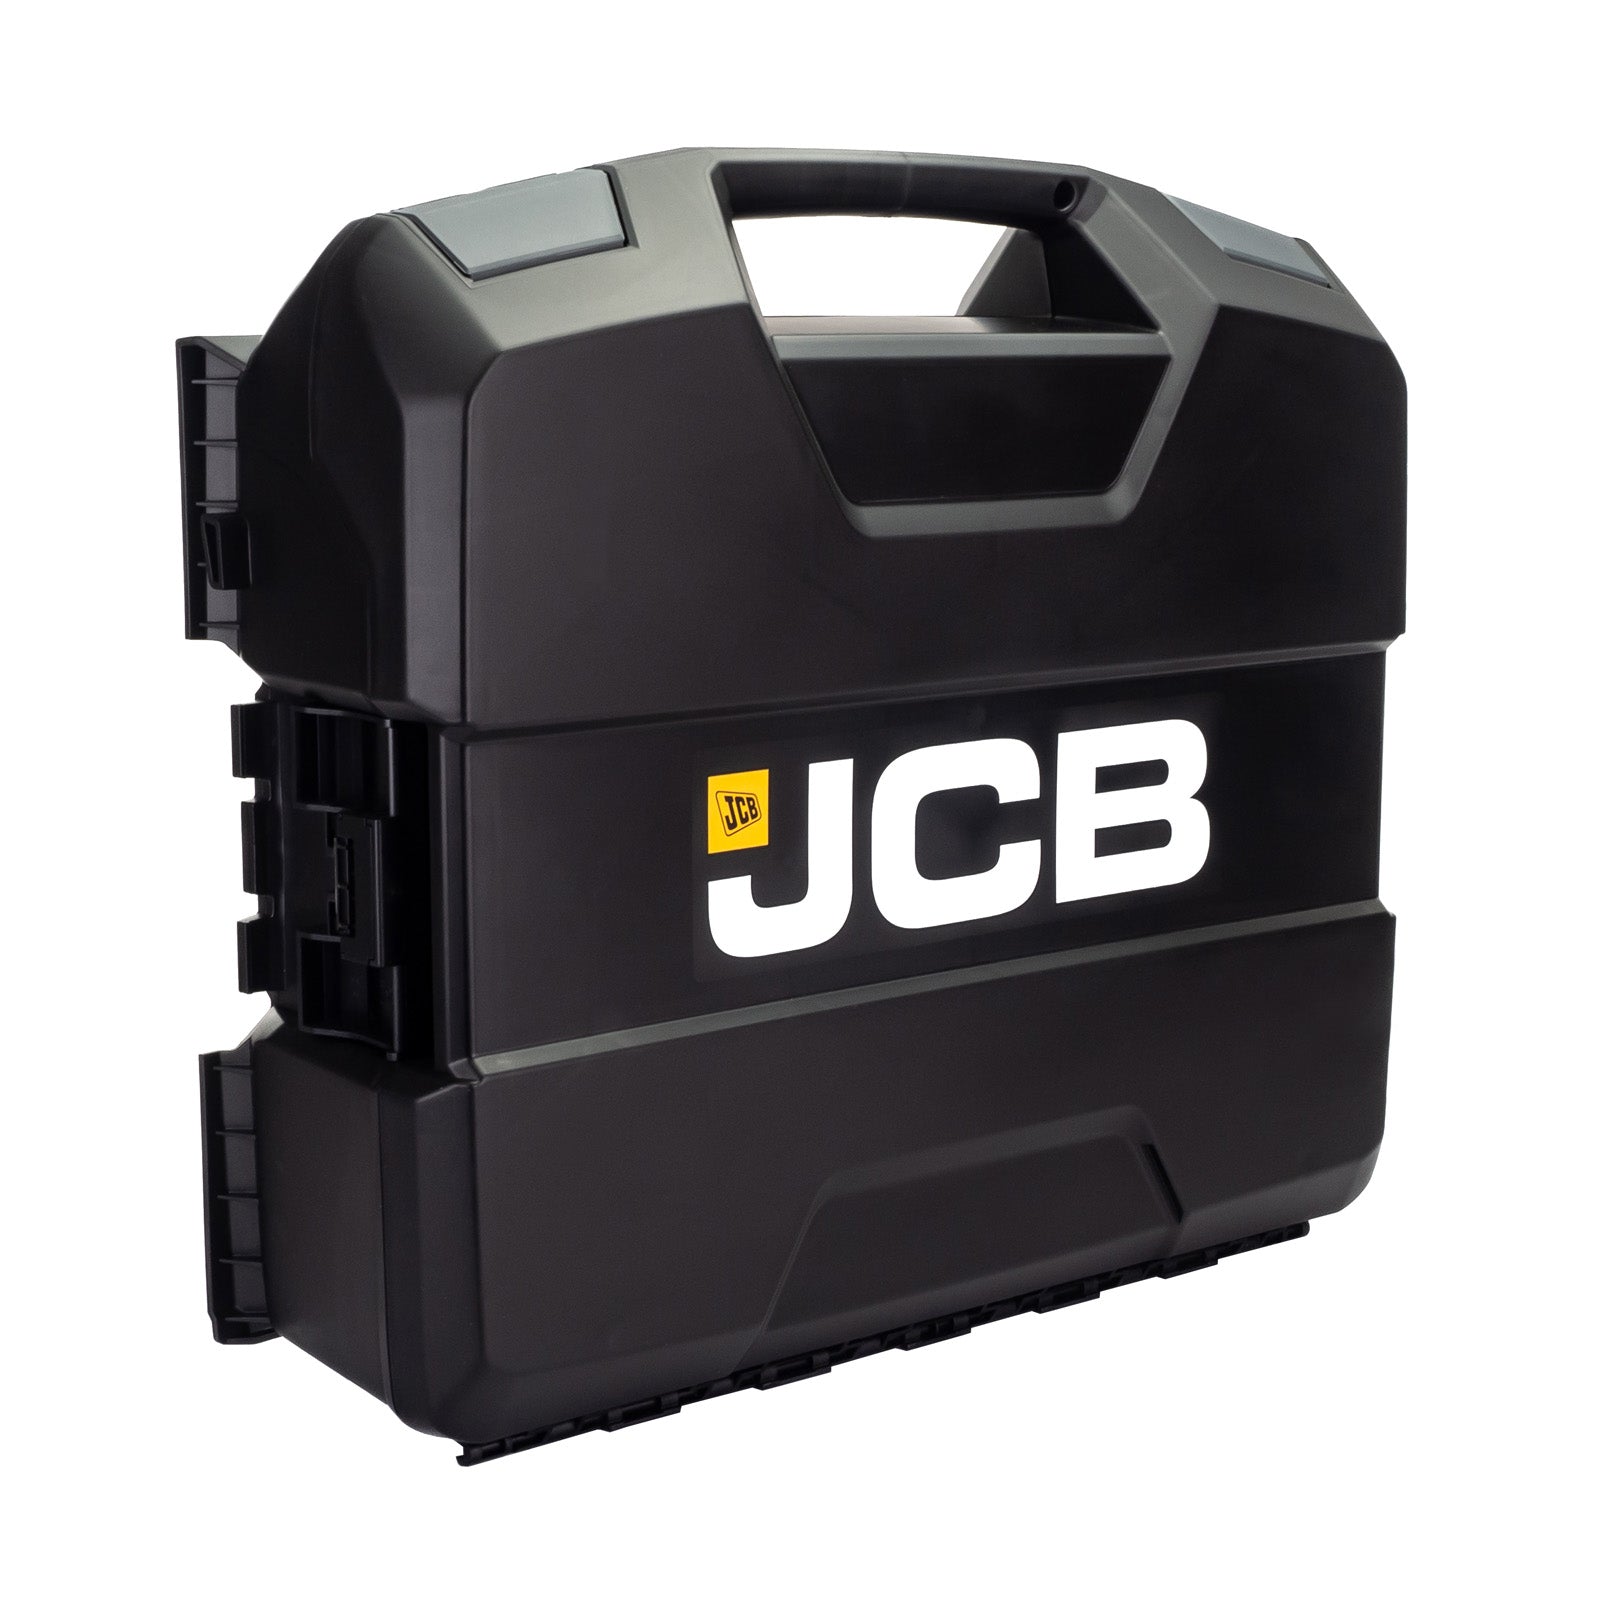 JCB 21-18BLCD-2-WB 18V Combi Drill with 2x2.0Ah Battery & Charger in W-Box 136